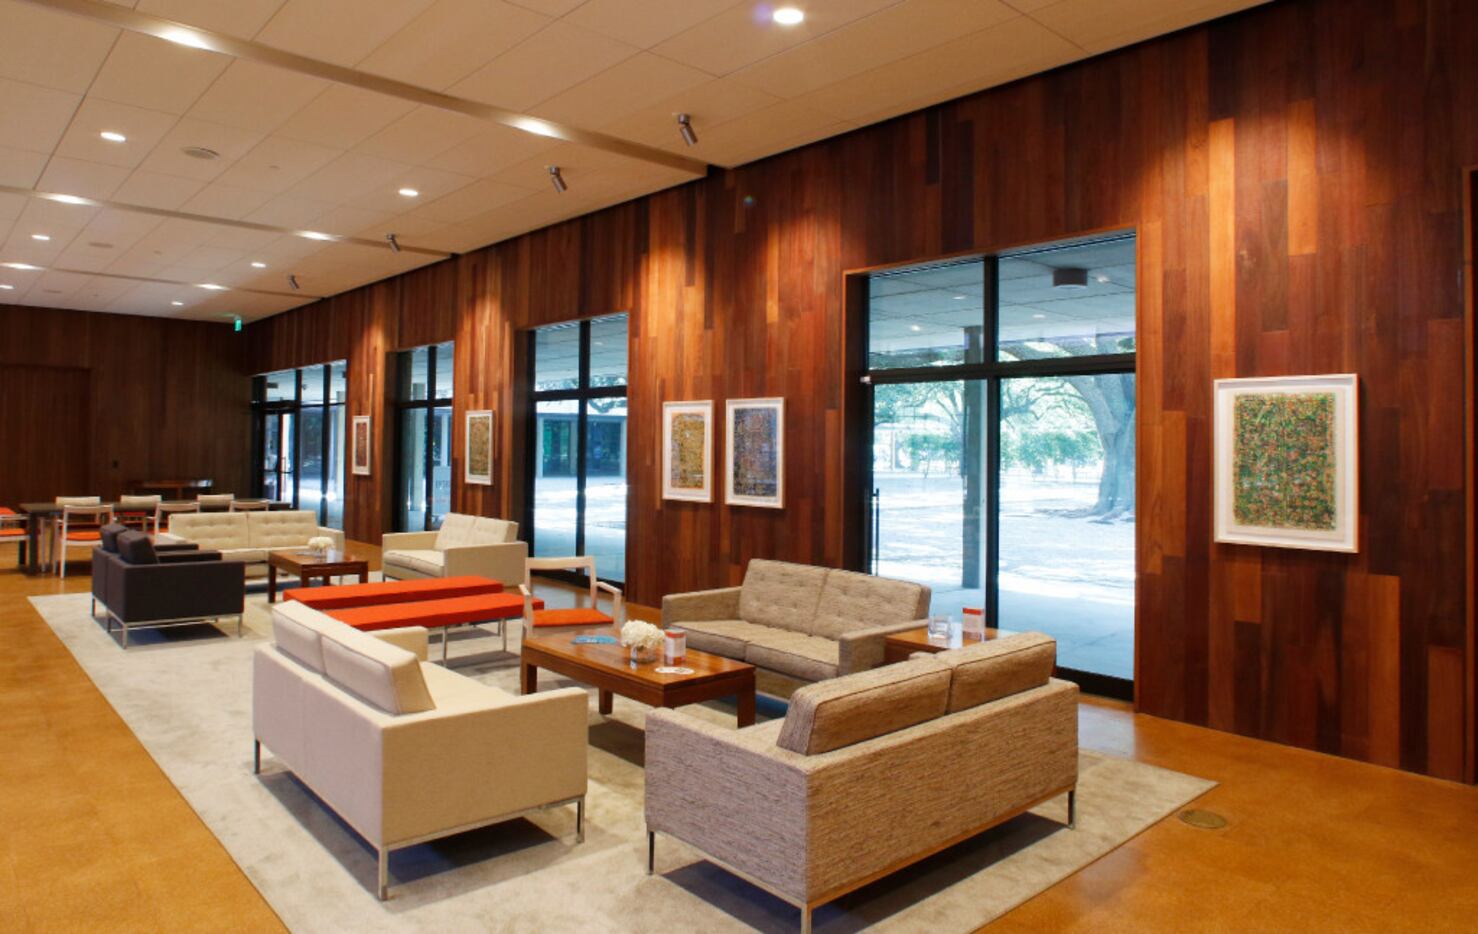 The remade Temple Emanu-El complex comes together in a spacious new gathering area. 